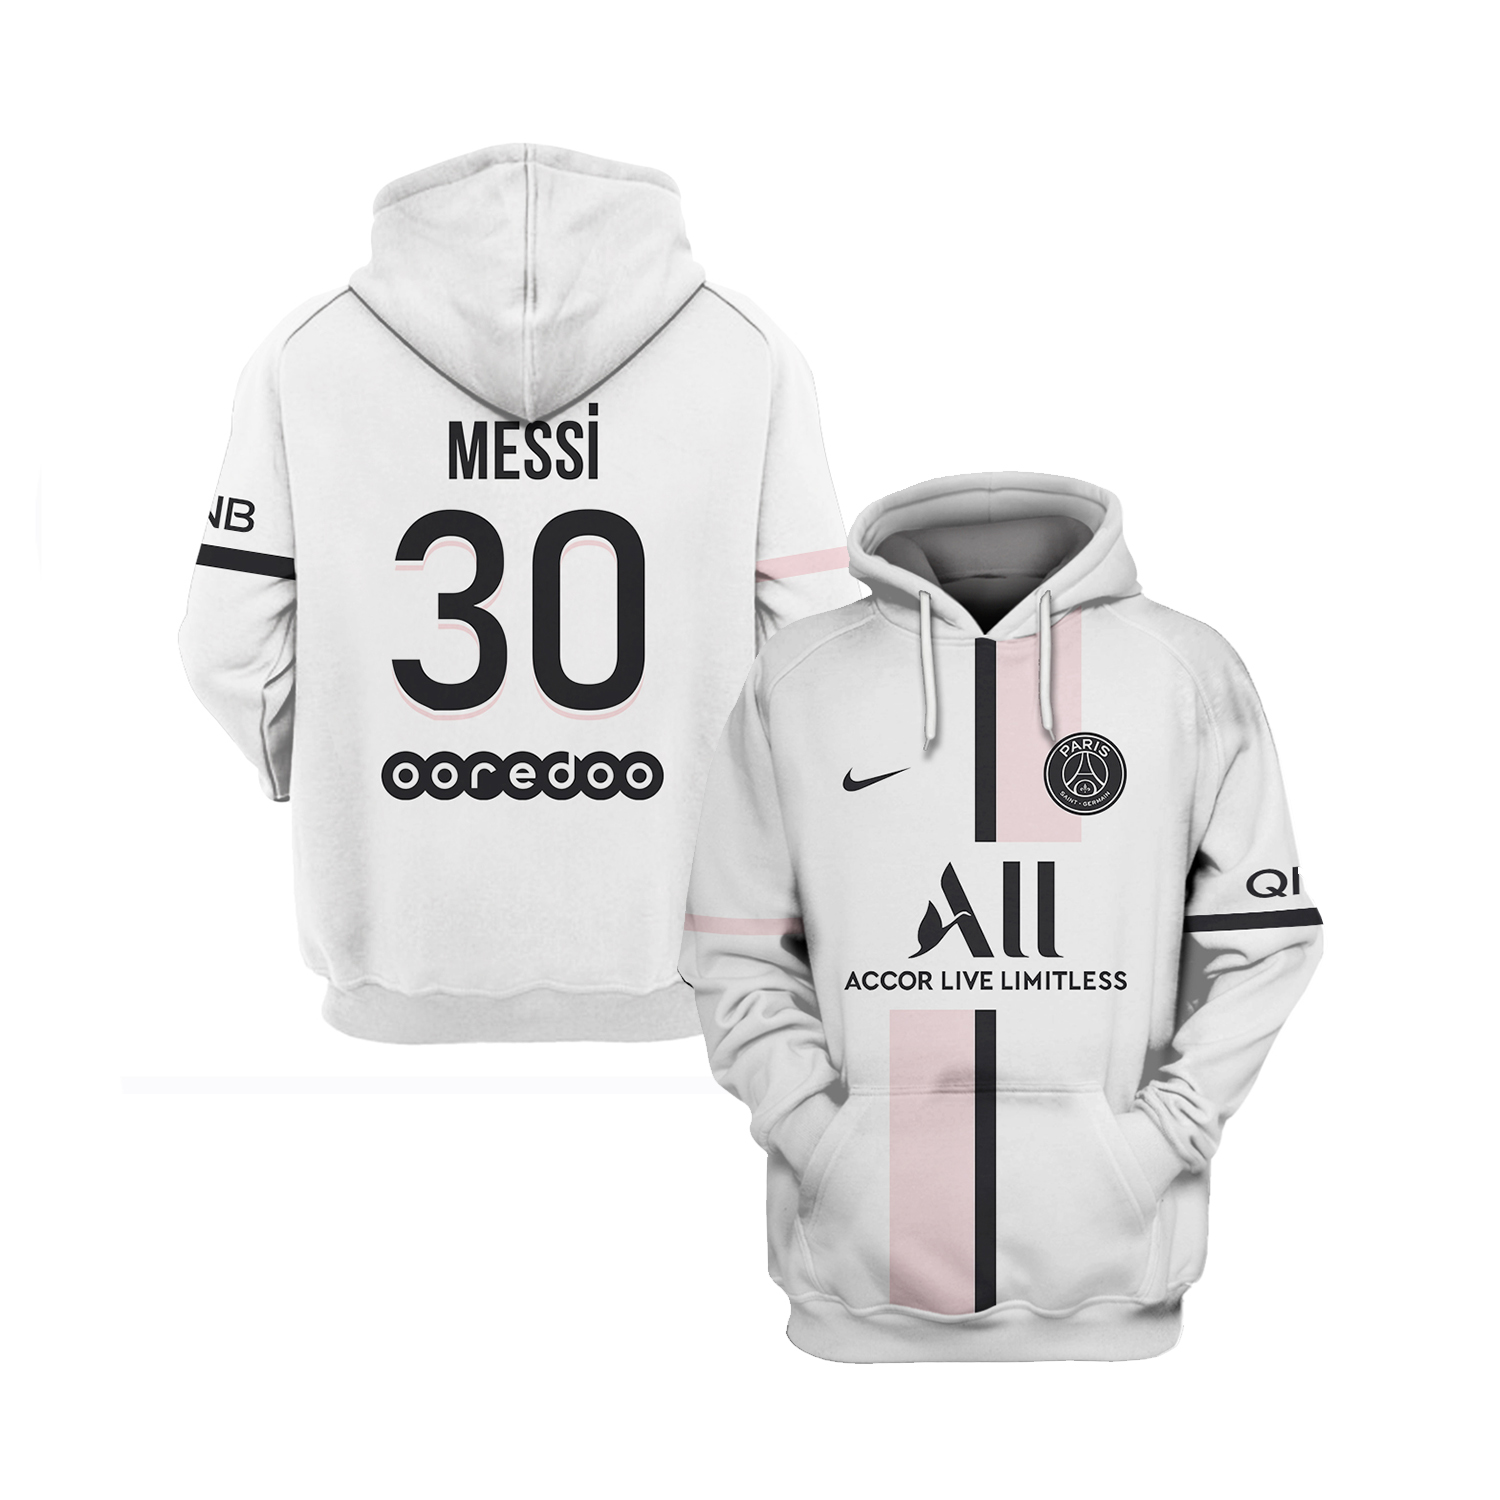 PSG Messi 3d hoodie and shirt – LIMITED EDITION